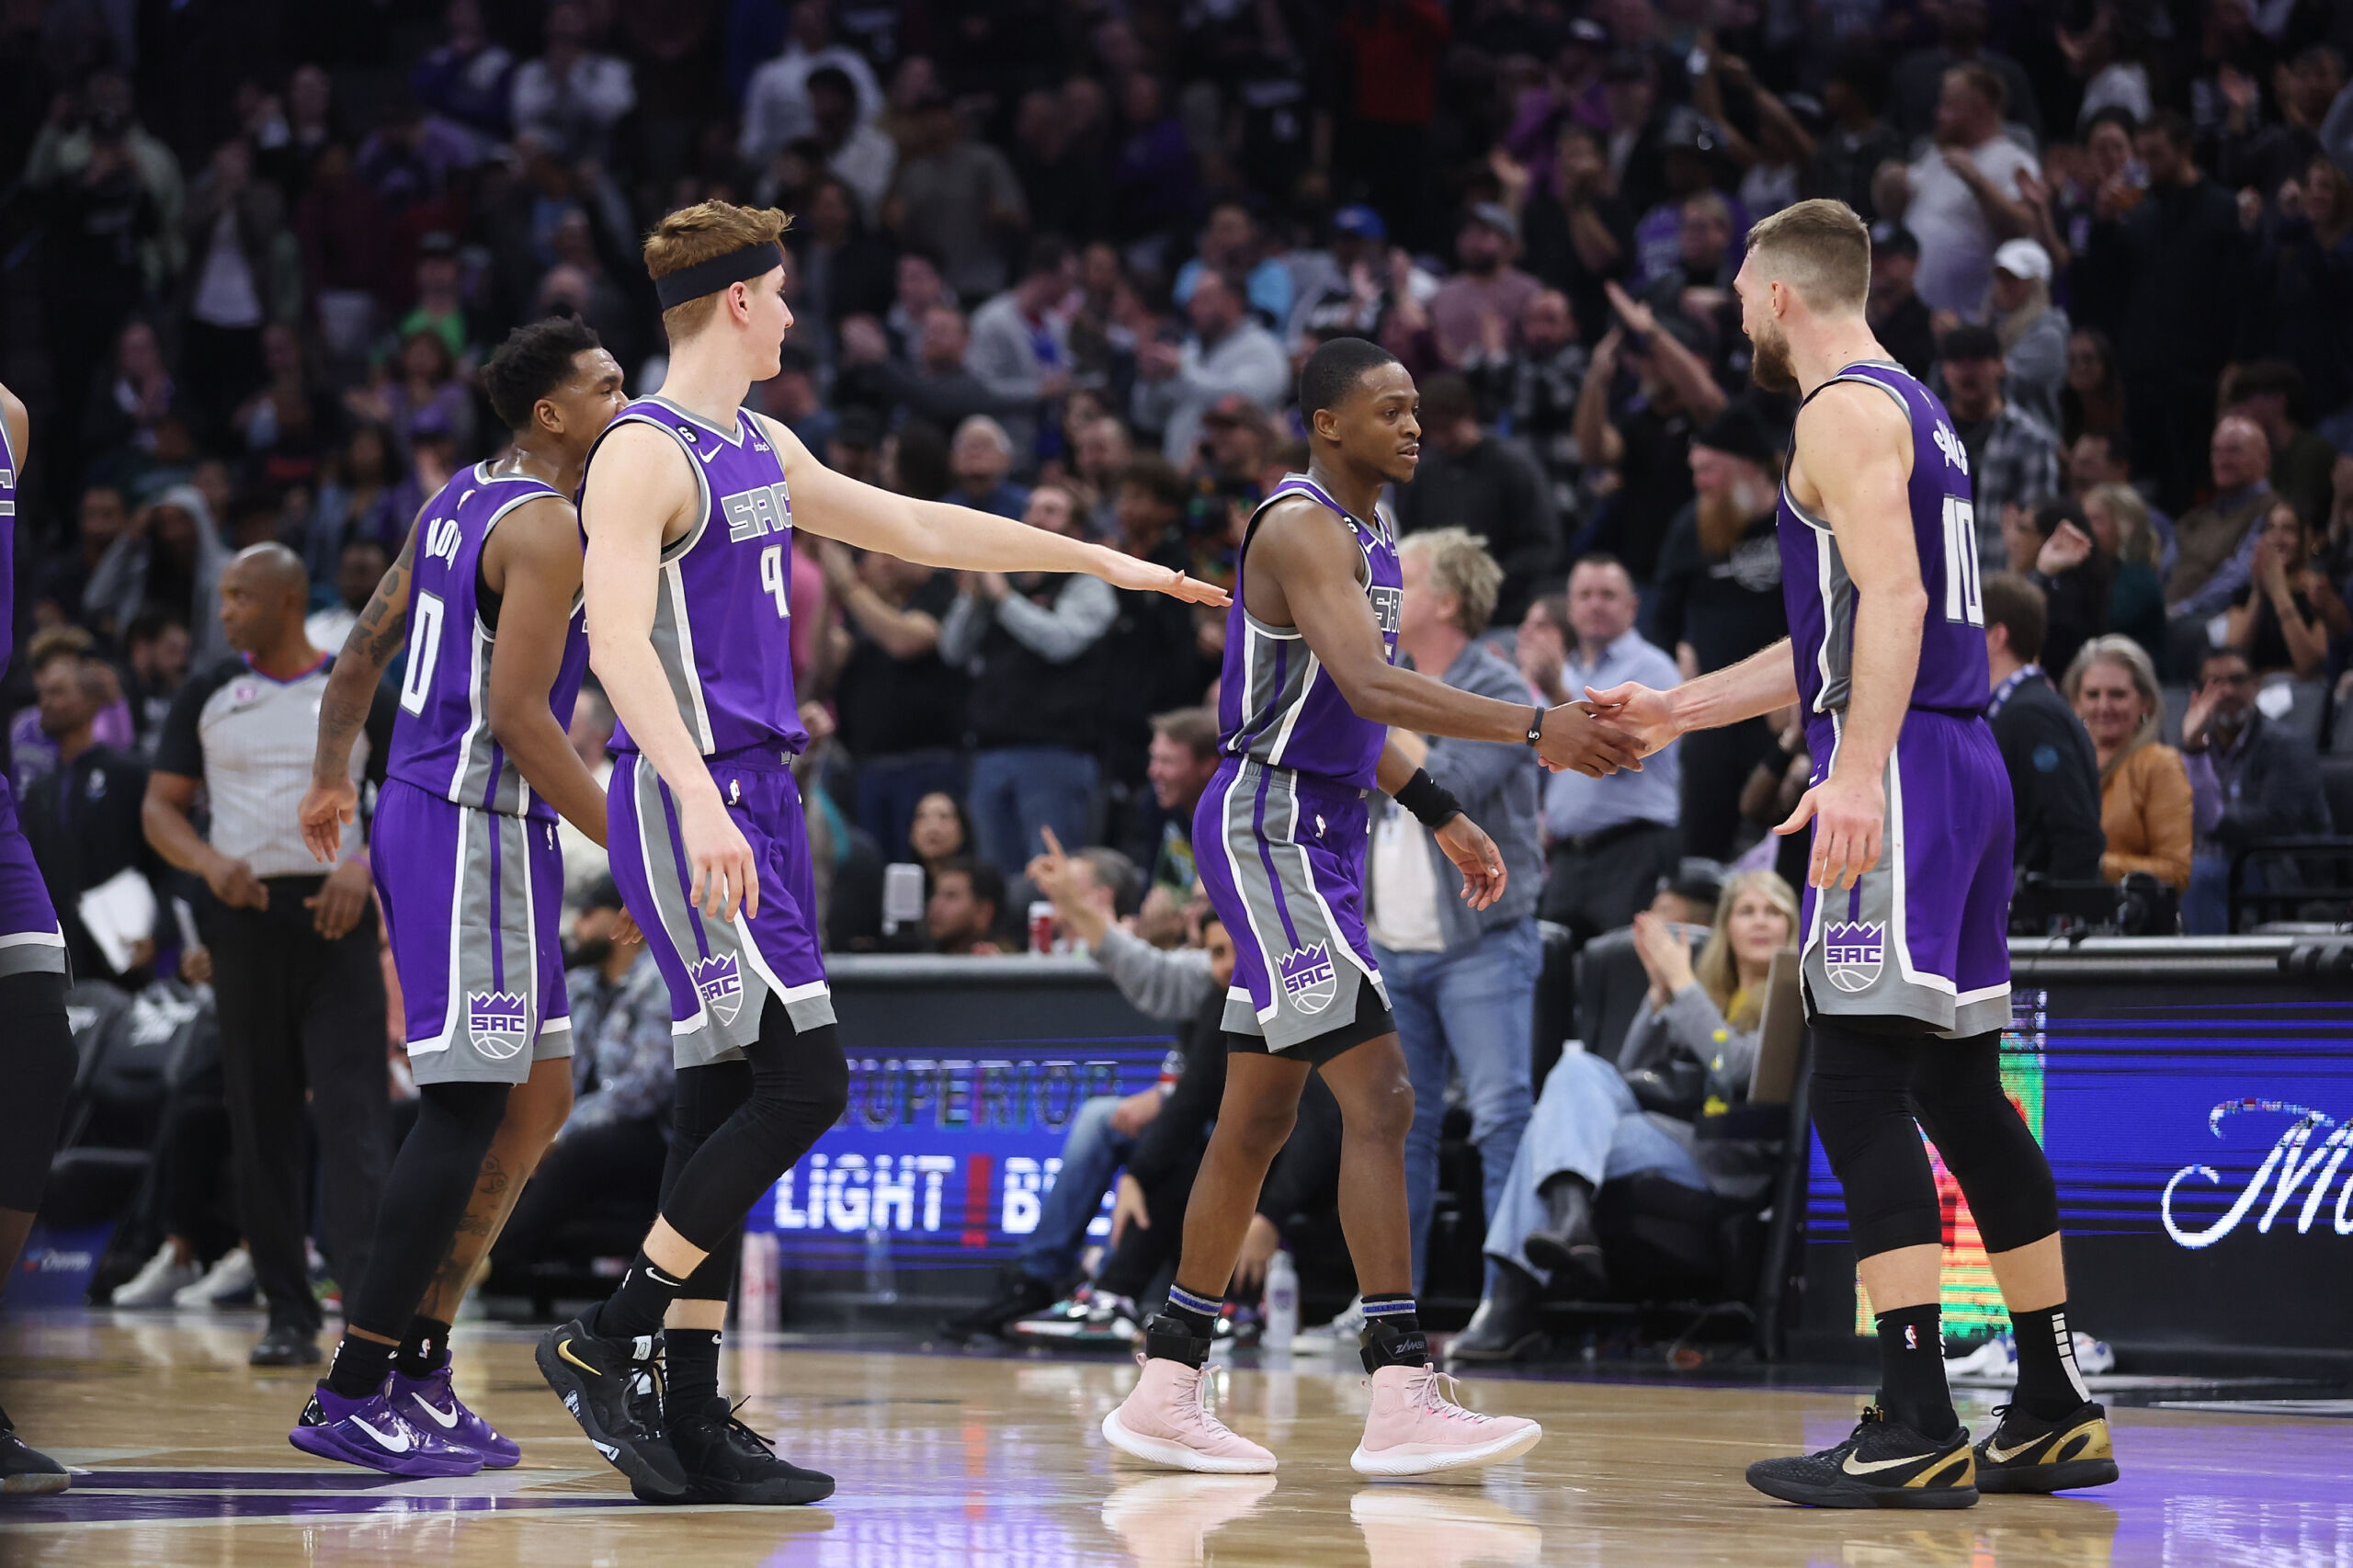 Kings vs. Lakers live stream: TV channel, how to watch